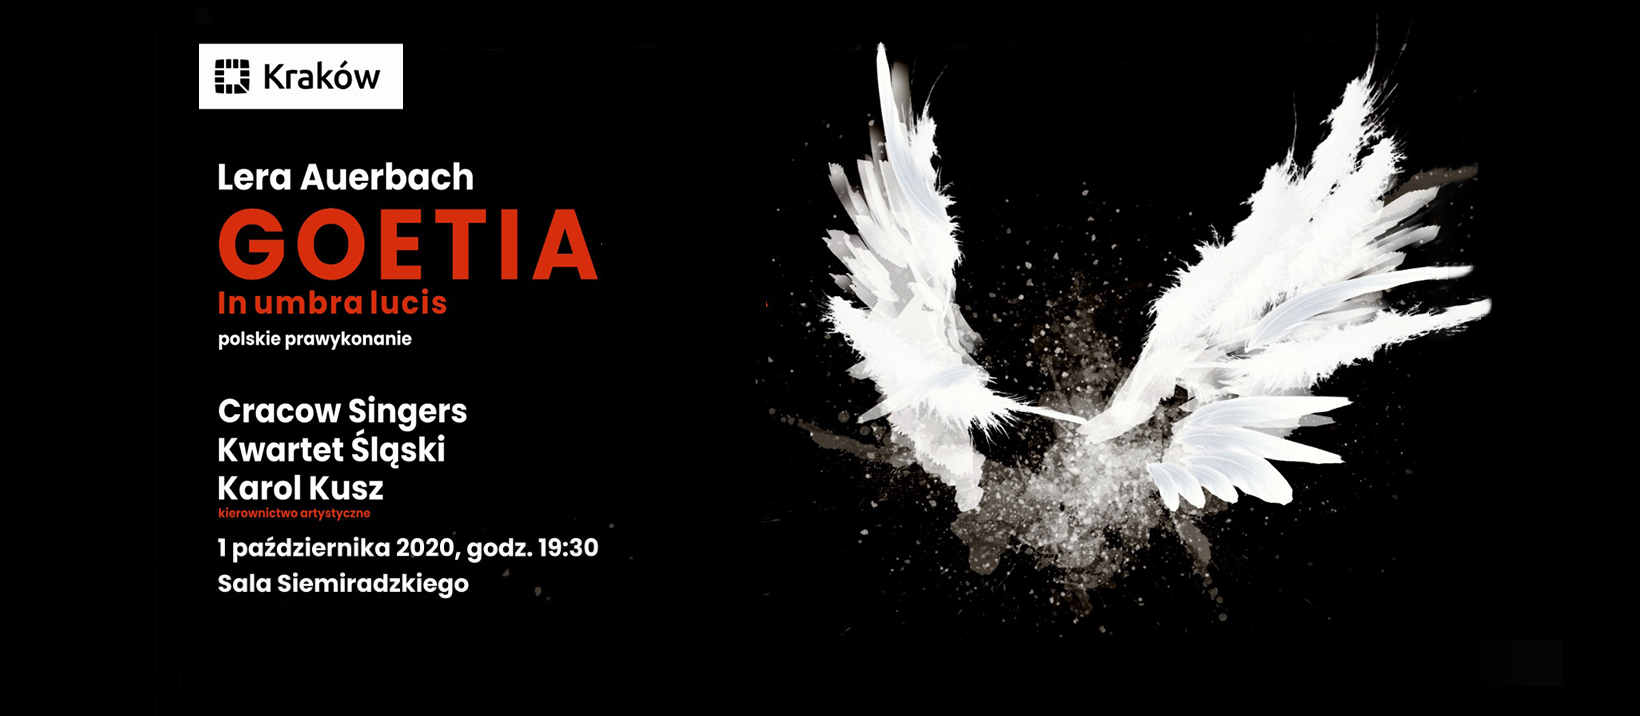 The Cracow Singers Perform The Polish Premiere Of Lera Auerbachs “goetia 72 In Umbra Lucis 